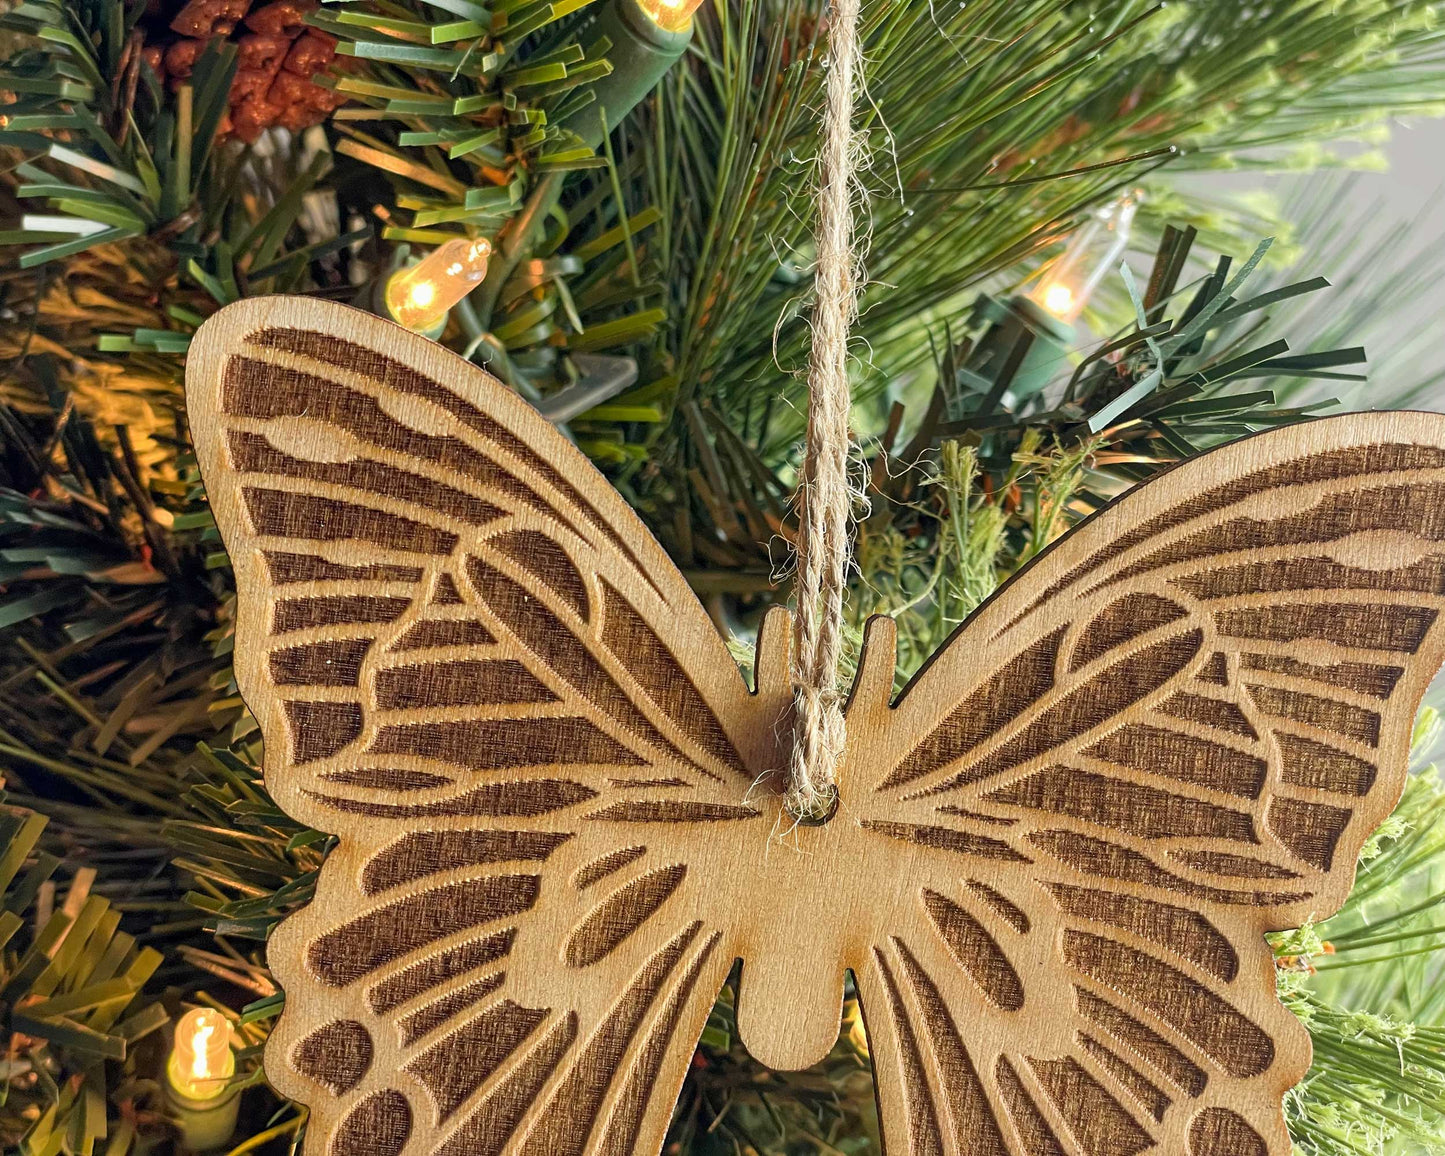 Butterfly Wood Rustic Ornament